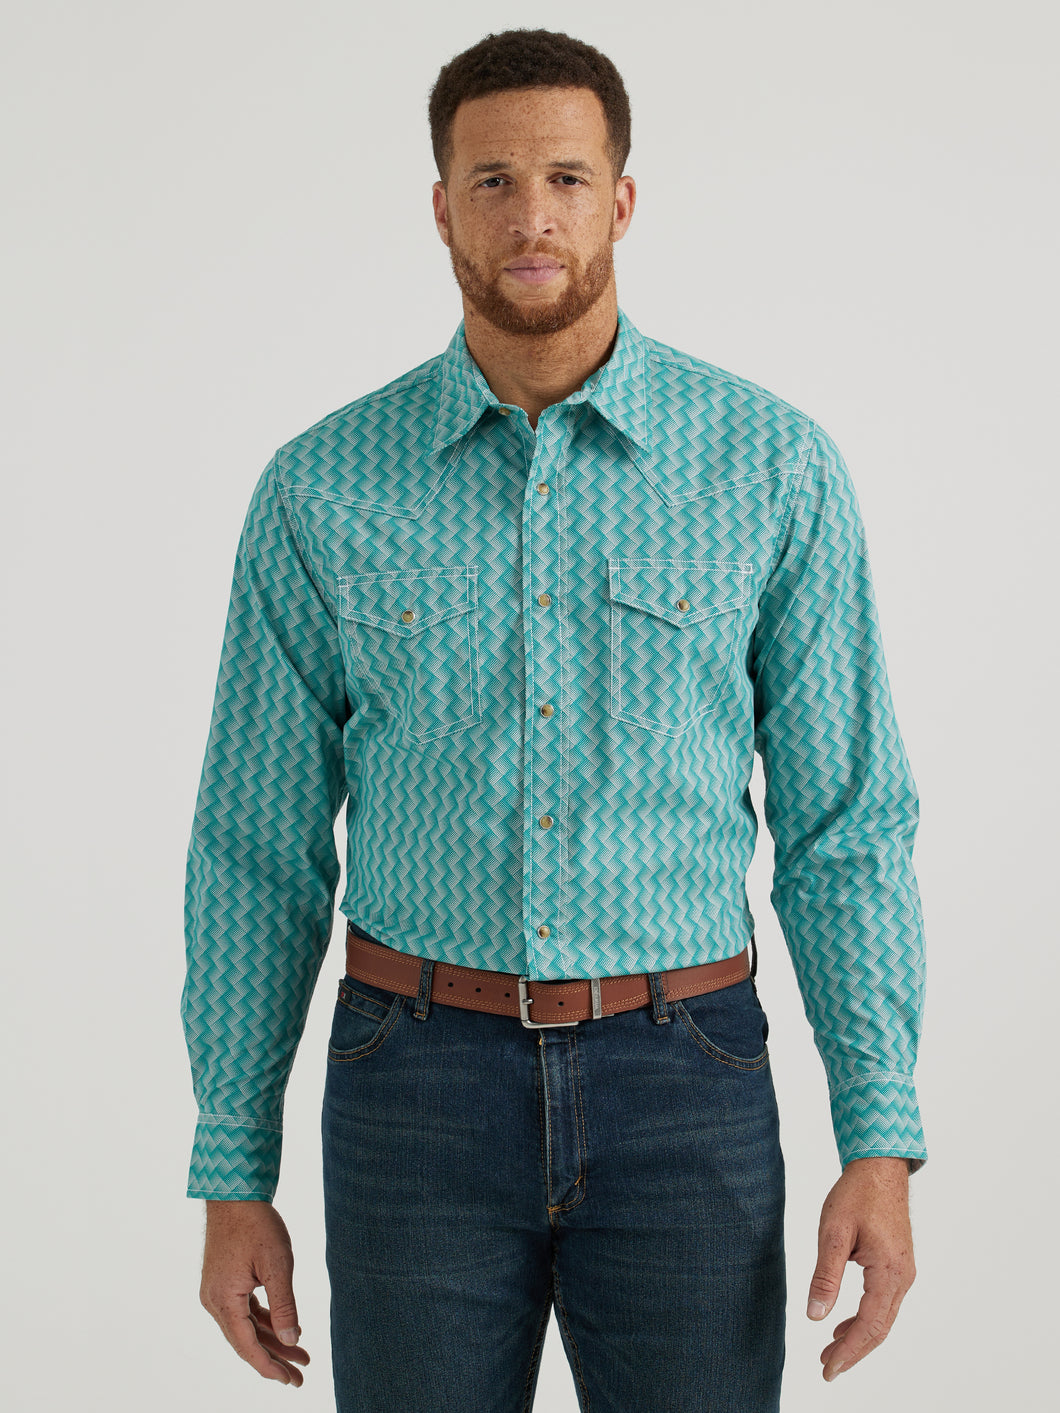 Pard's Western Shop Men's Wrangler 20X Competition Advanced Comfort Green/White Weave Print Western Snap Shirt